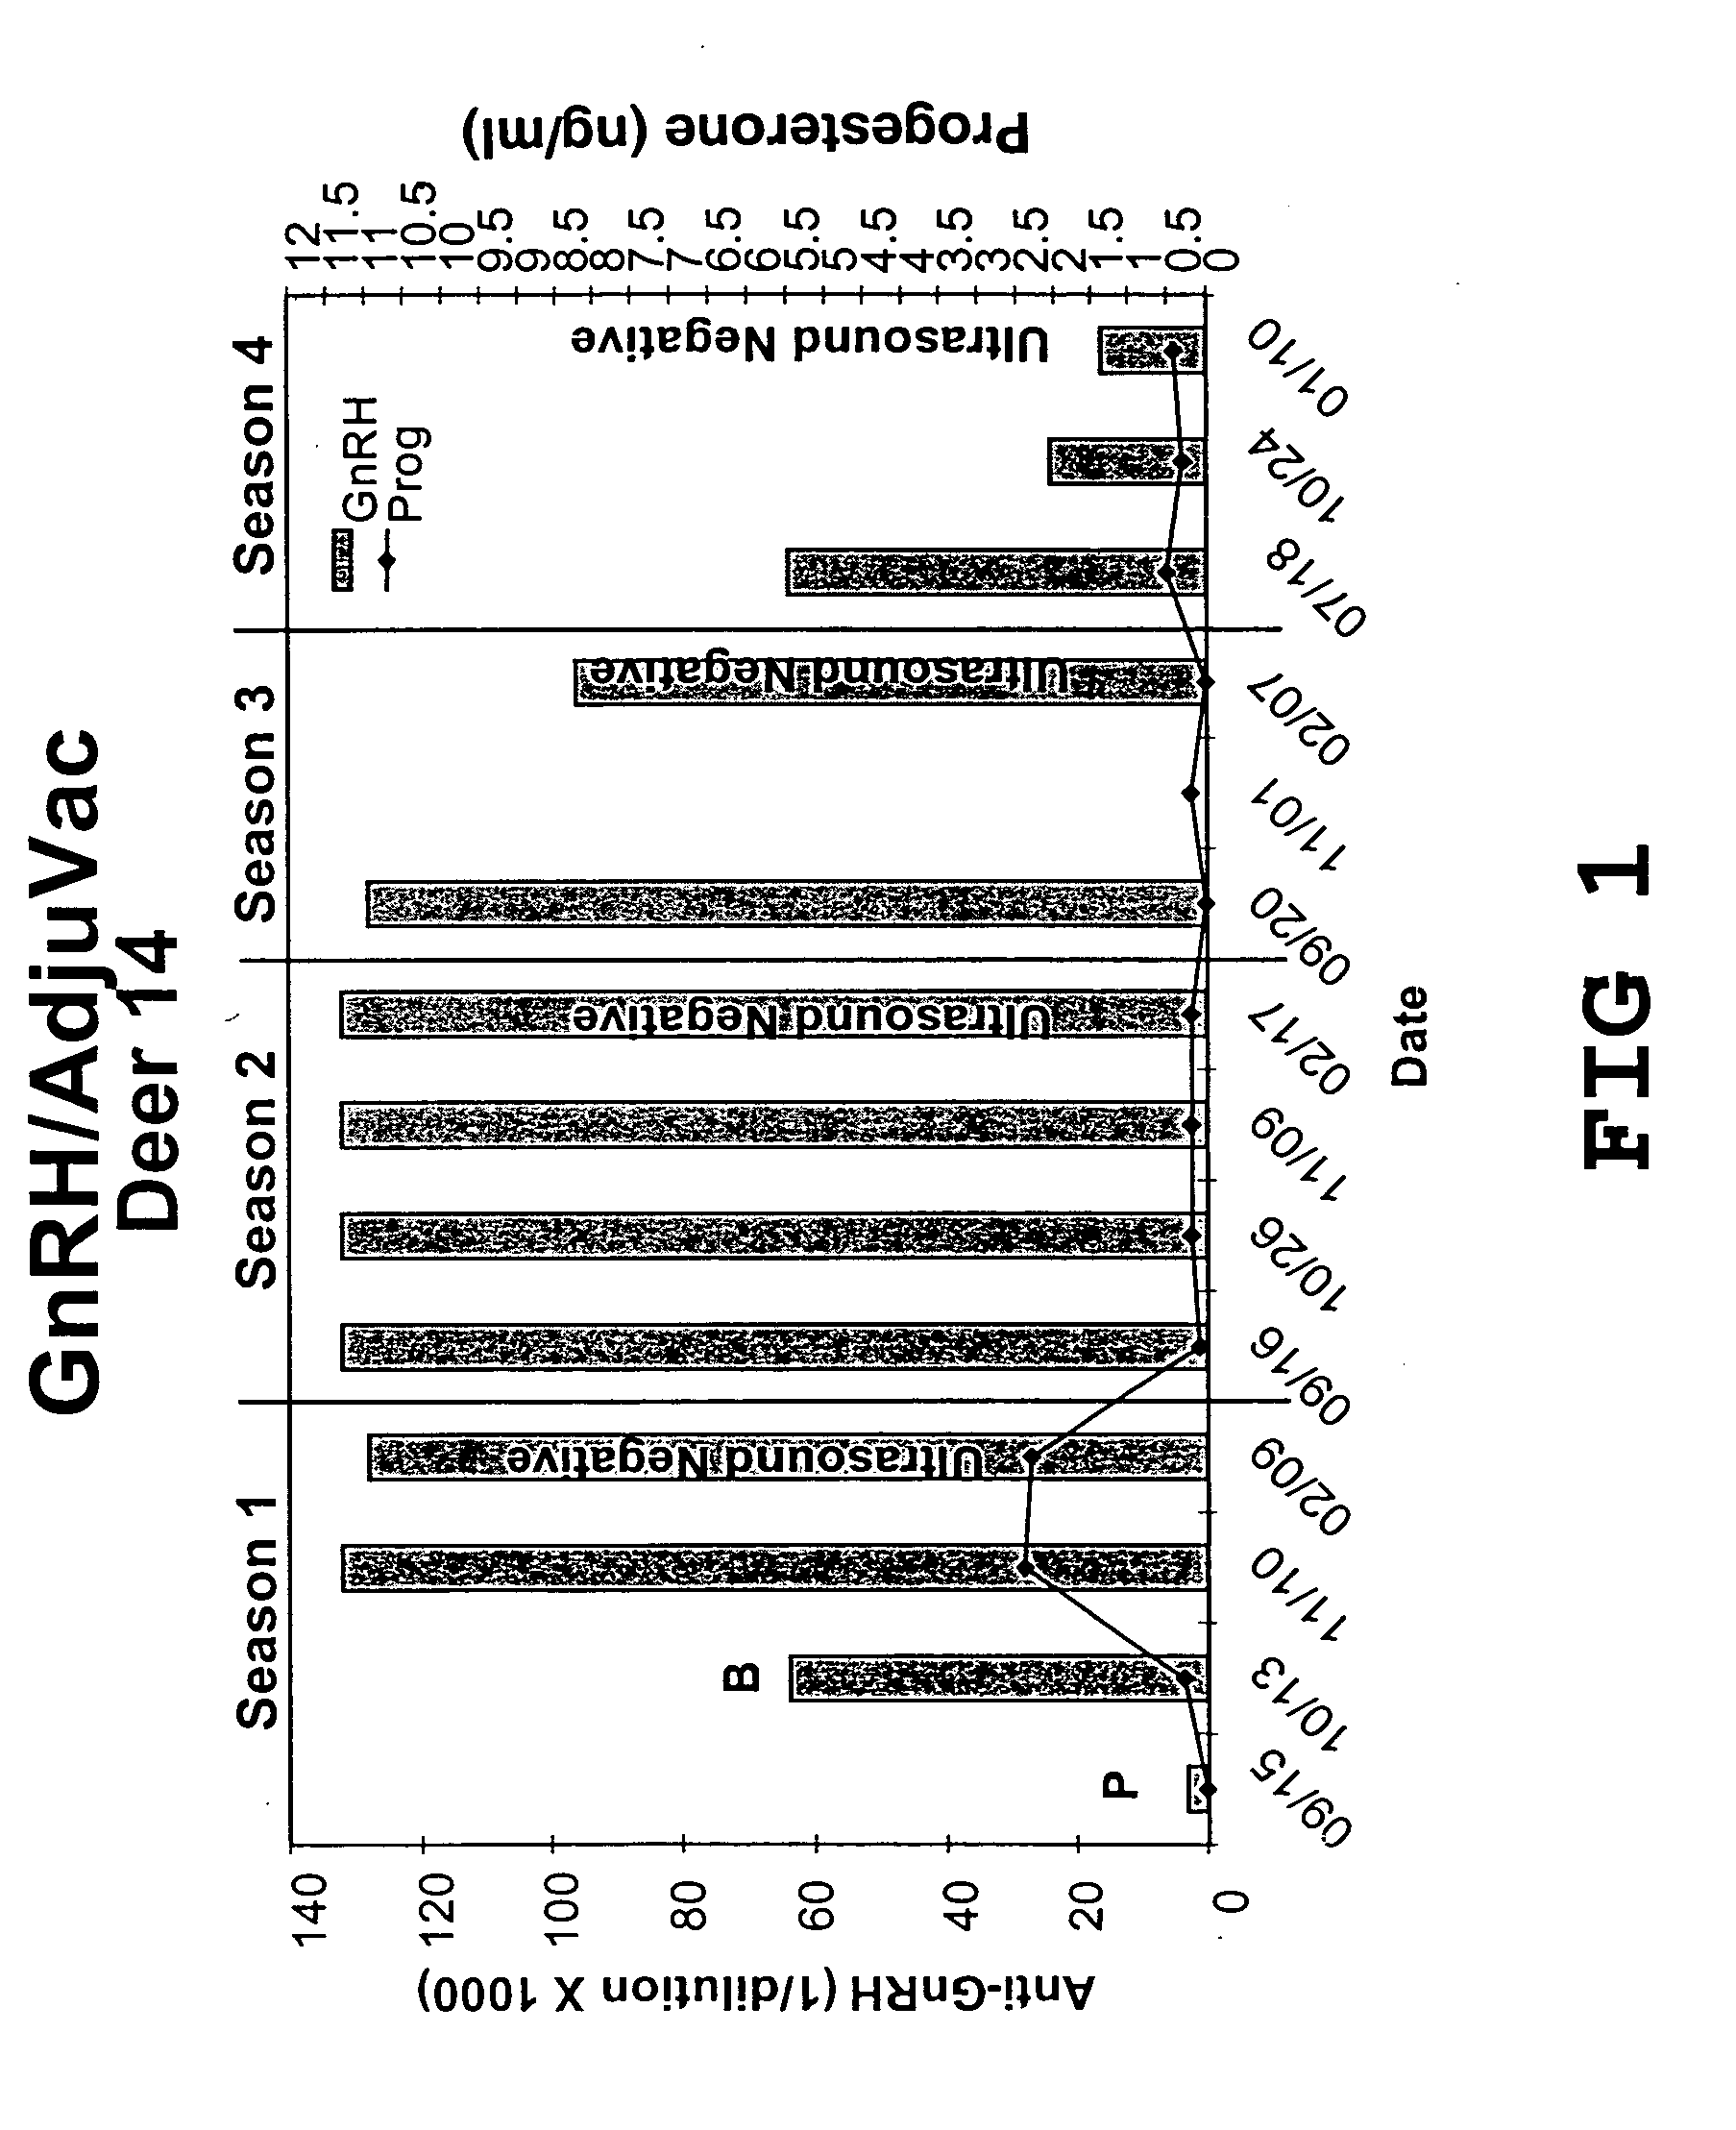 Vaccine compositions and adjuvant